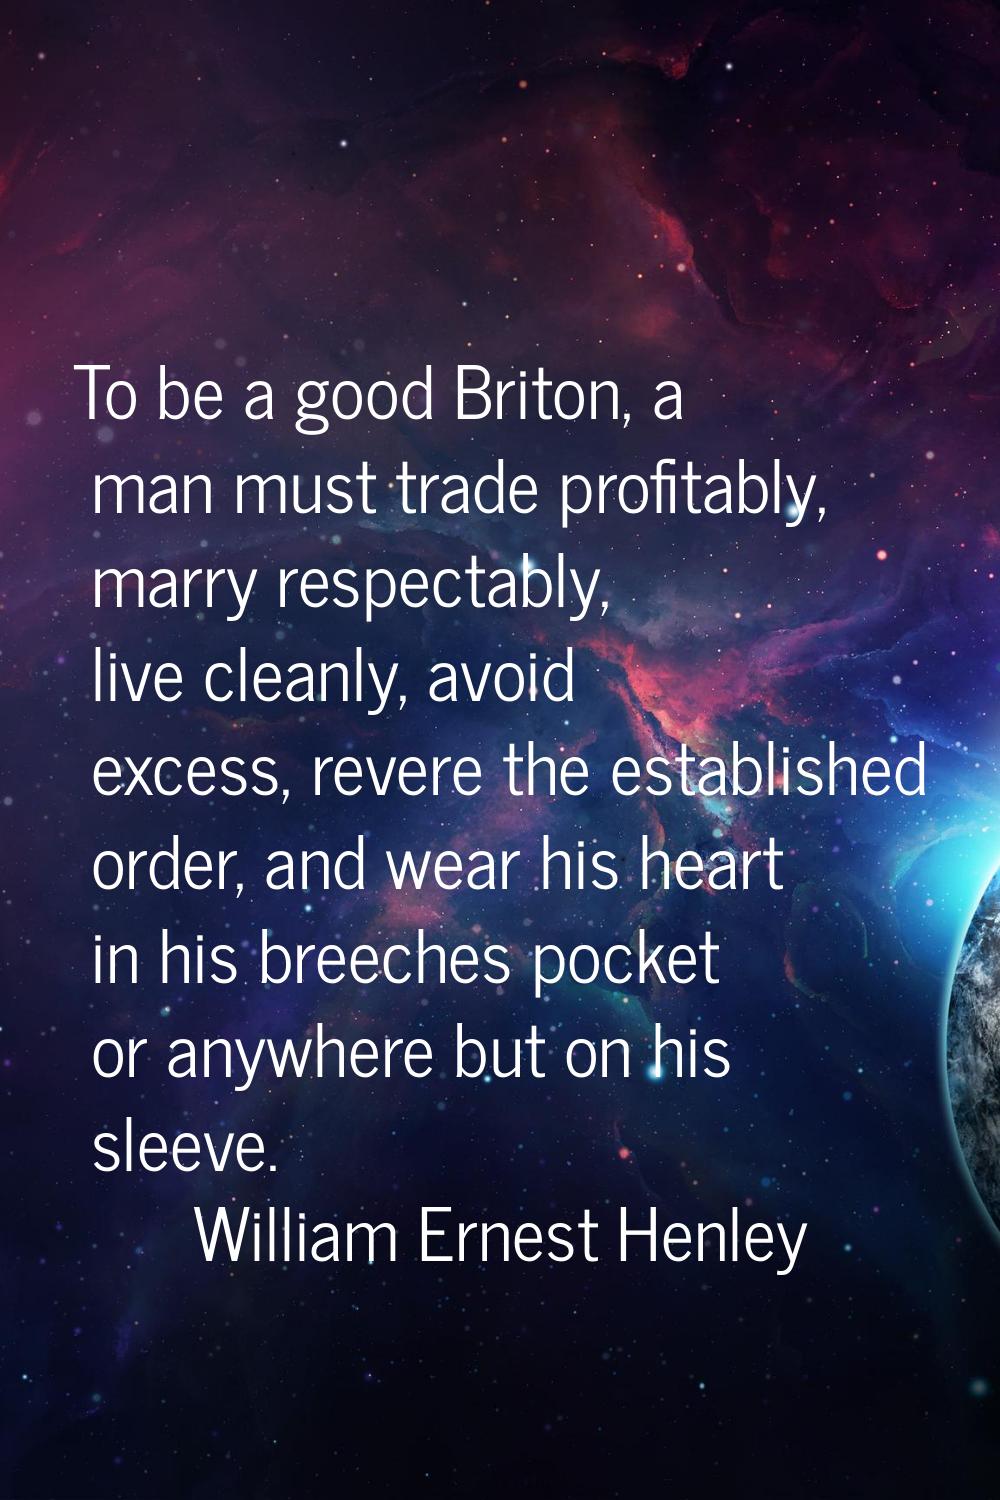 To be a good Briton, a man must trade profitably, marry respectably, live cleanly, avoid excess, re